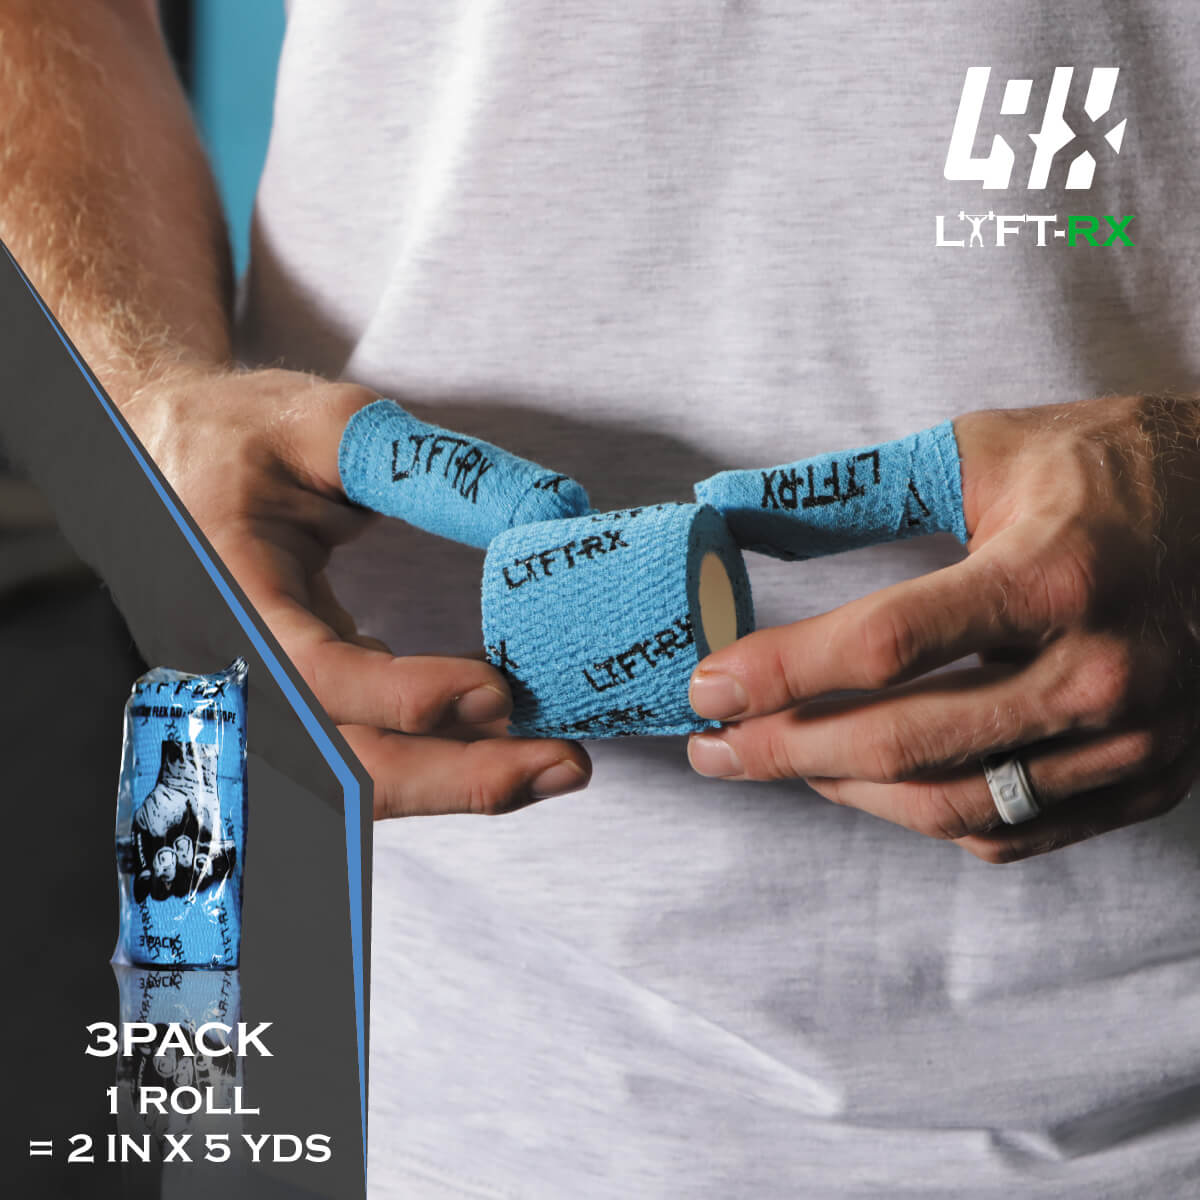 LYFT-RX Weightlifting Hook Grip Tape – Premium Adhesive Stretch Athletic  Thumb